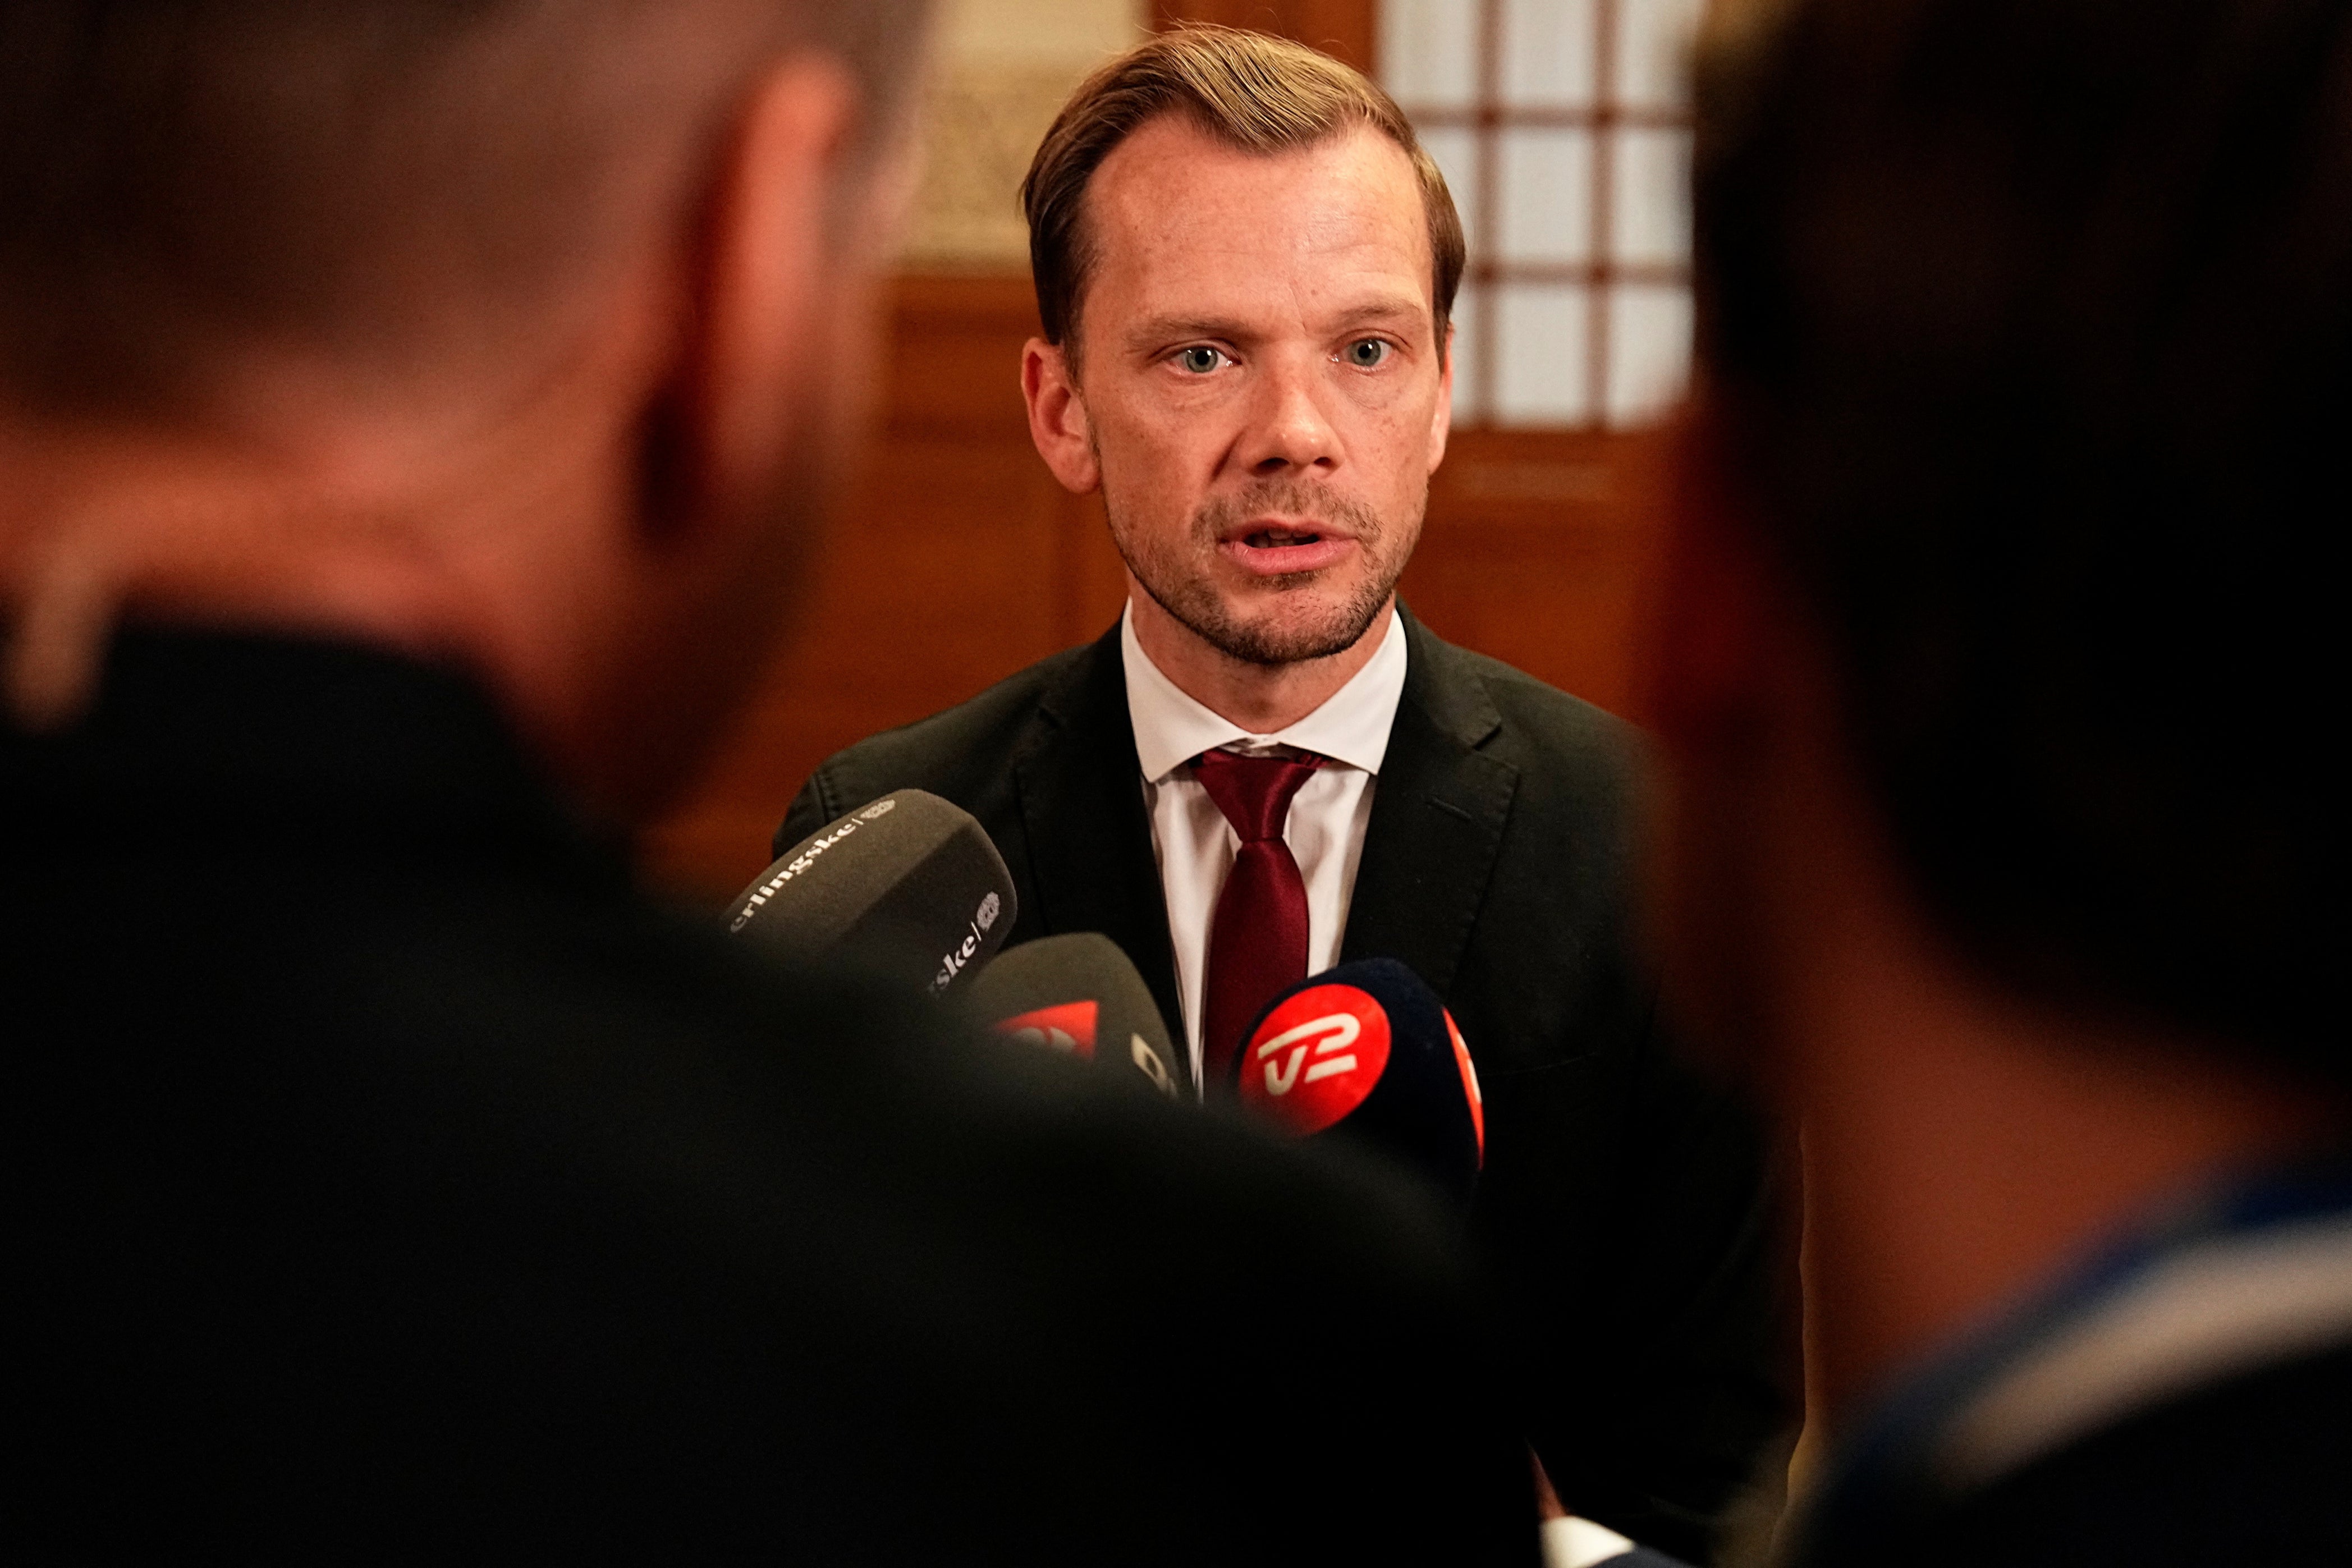 Denmark’s justice minister, Peter Hummelgaard, after the parliamentary vote